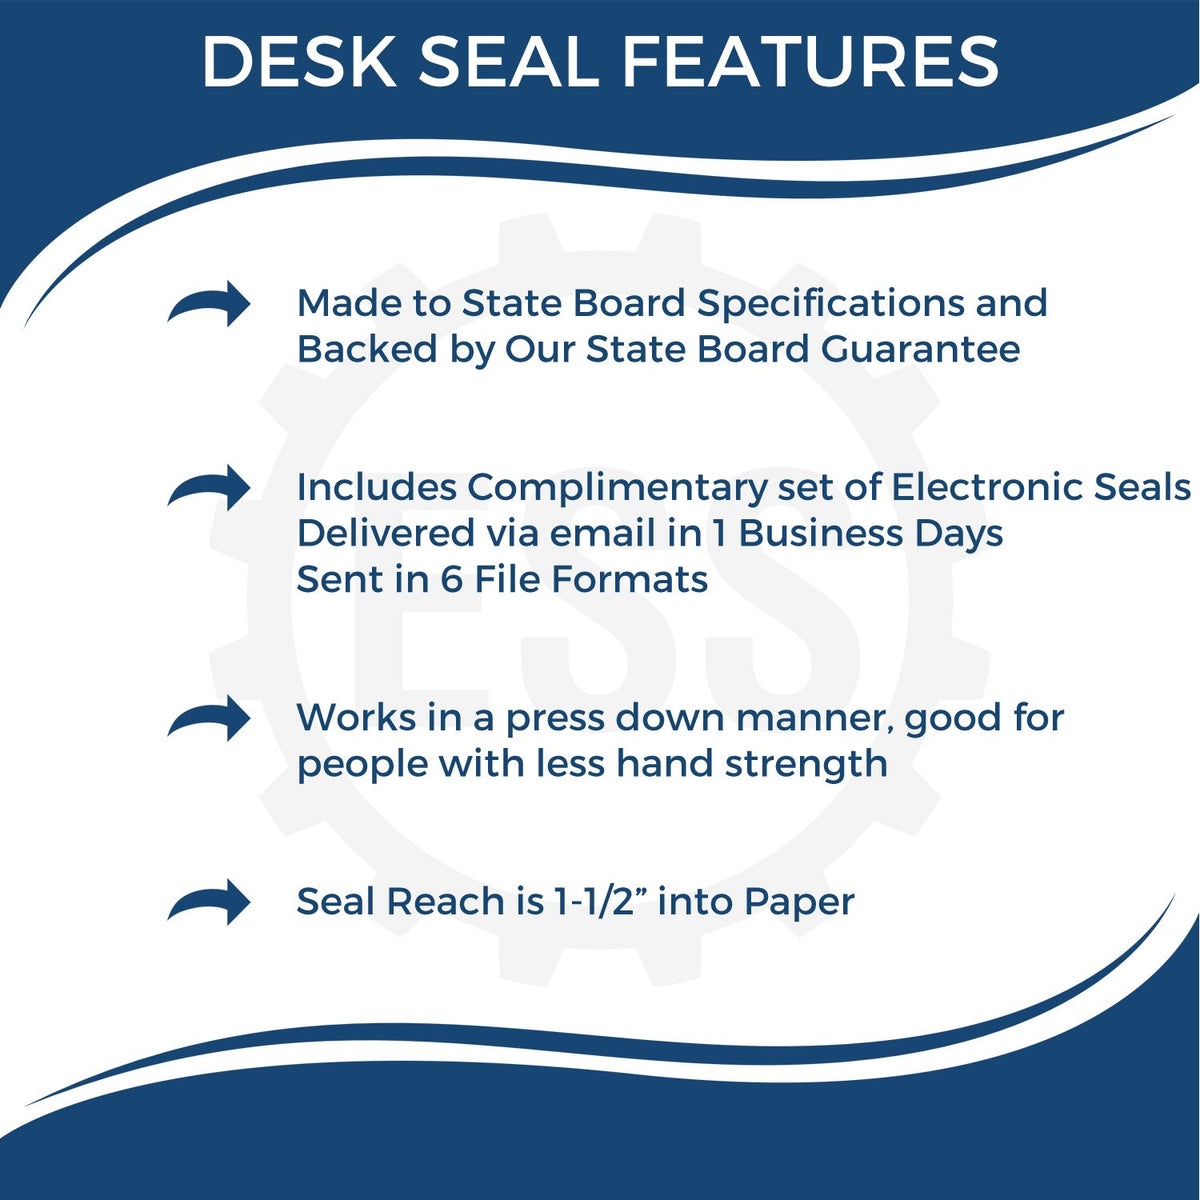 A picture of an infographic highlighting the selling points for the Massachusetts Geologist Desk Seal